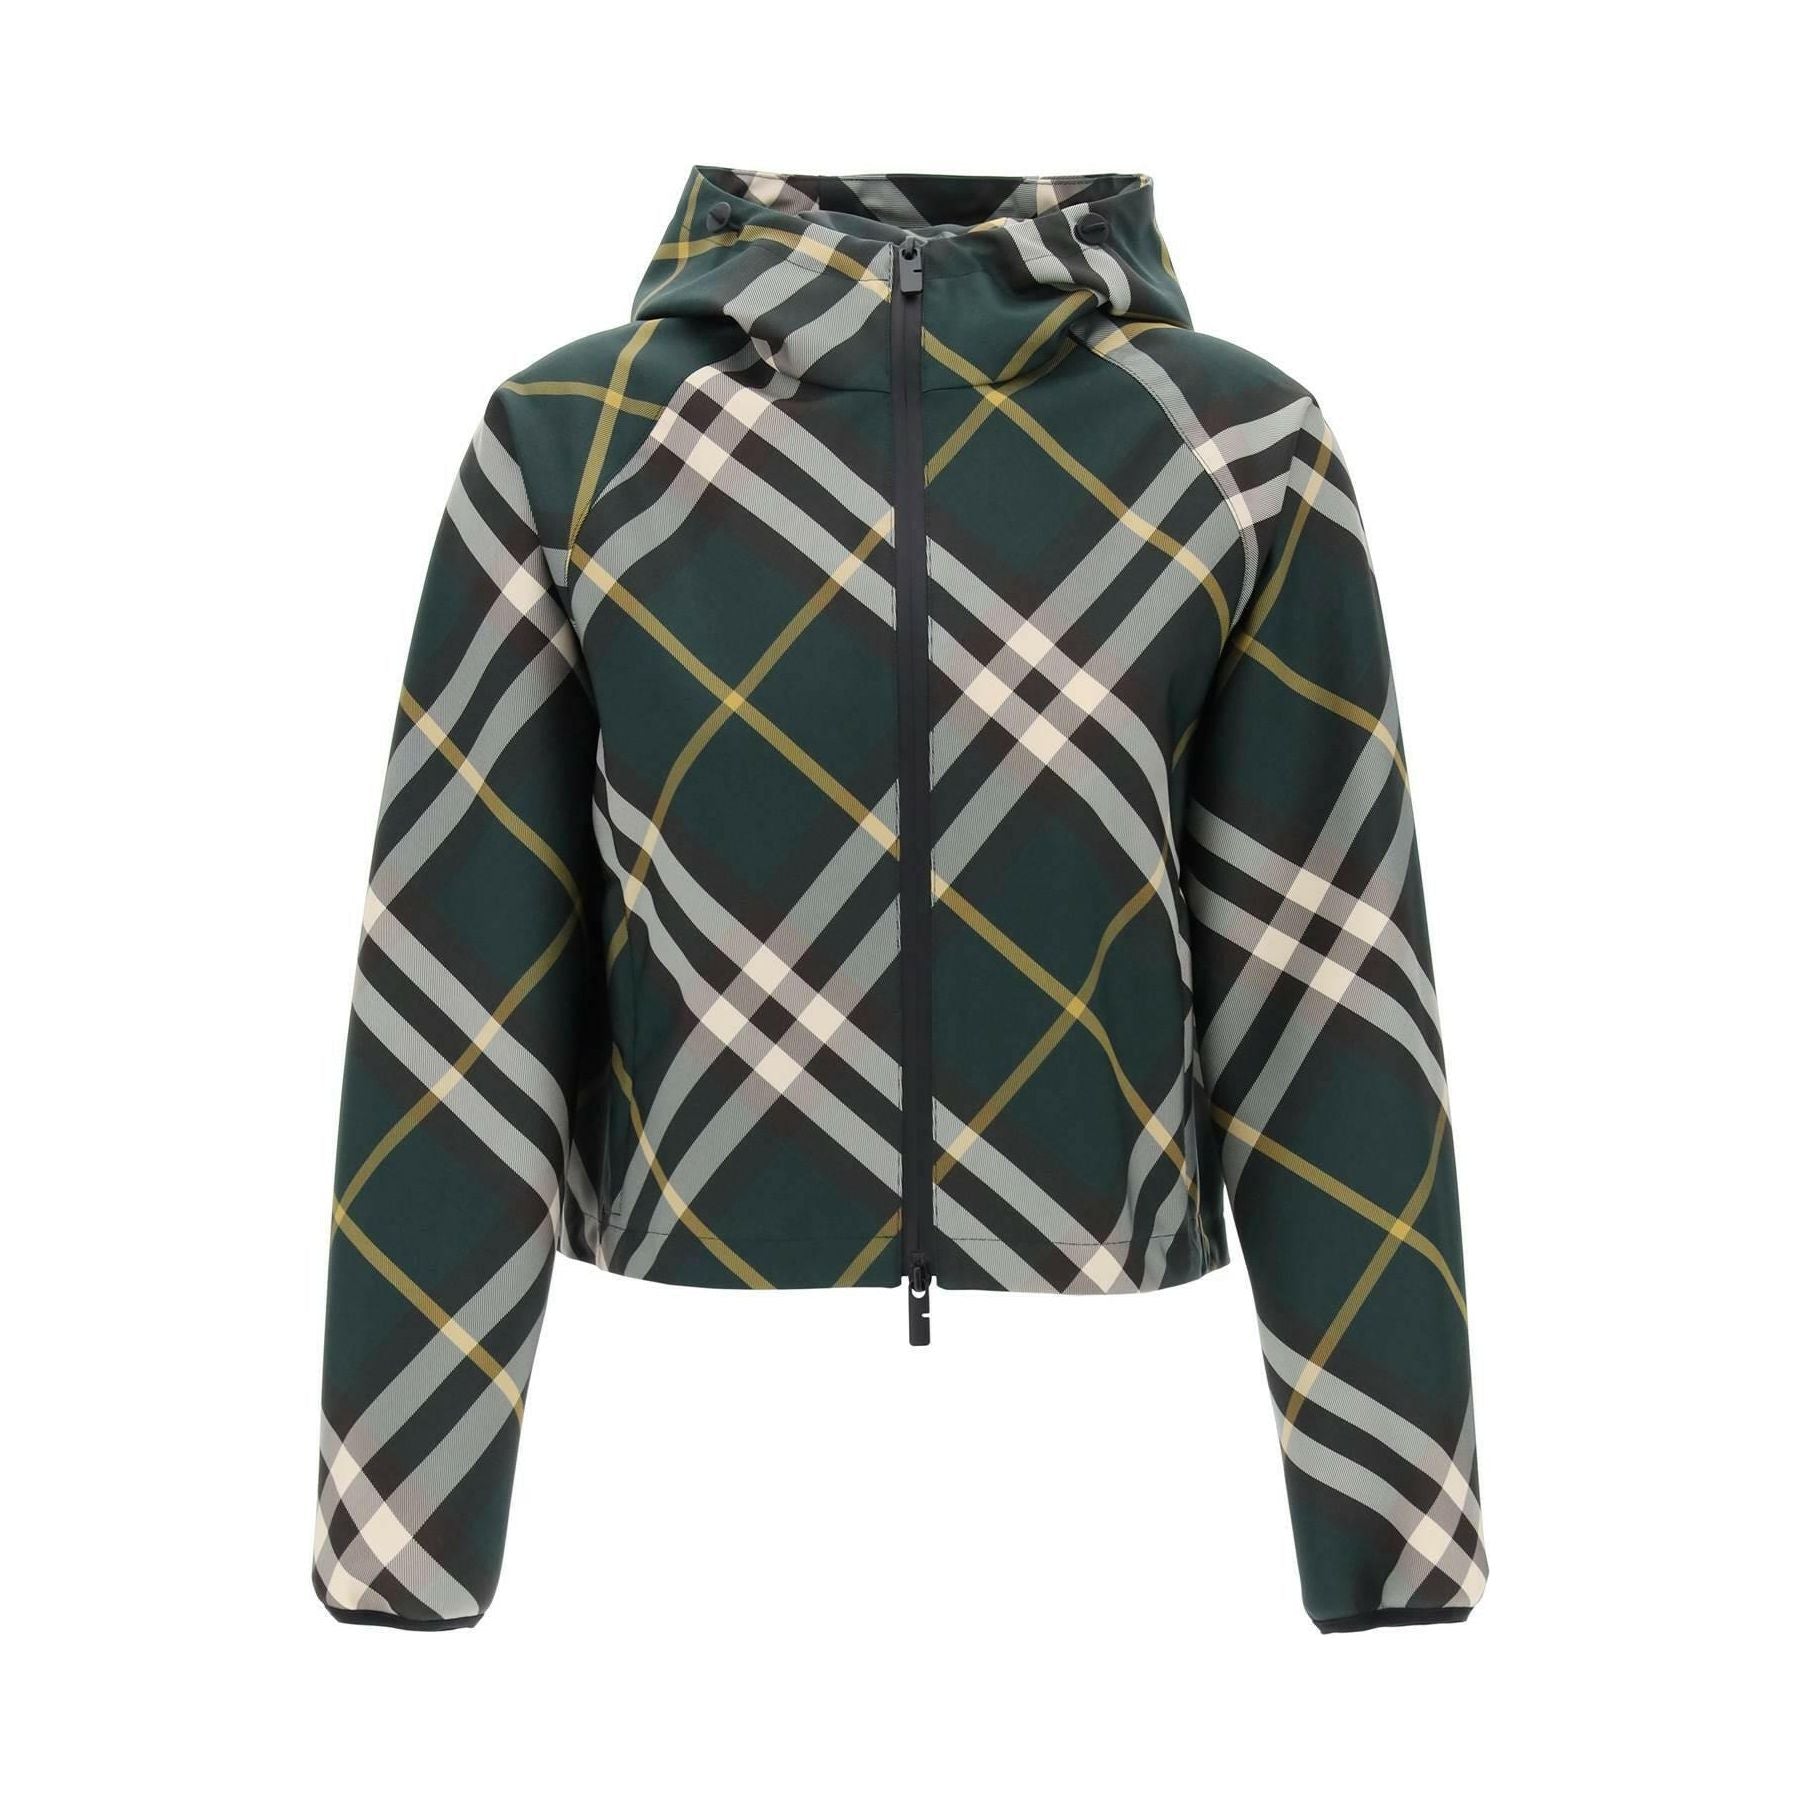 Cropped Check Lightweight Jacket in Ivy BURBERRY JOHN JULIA.